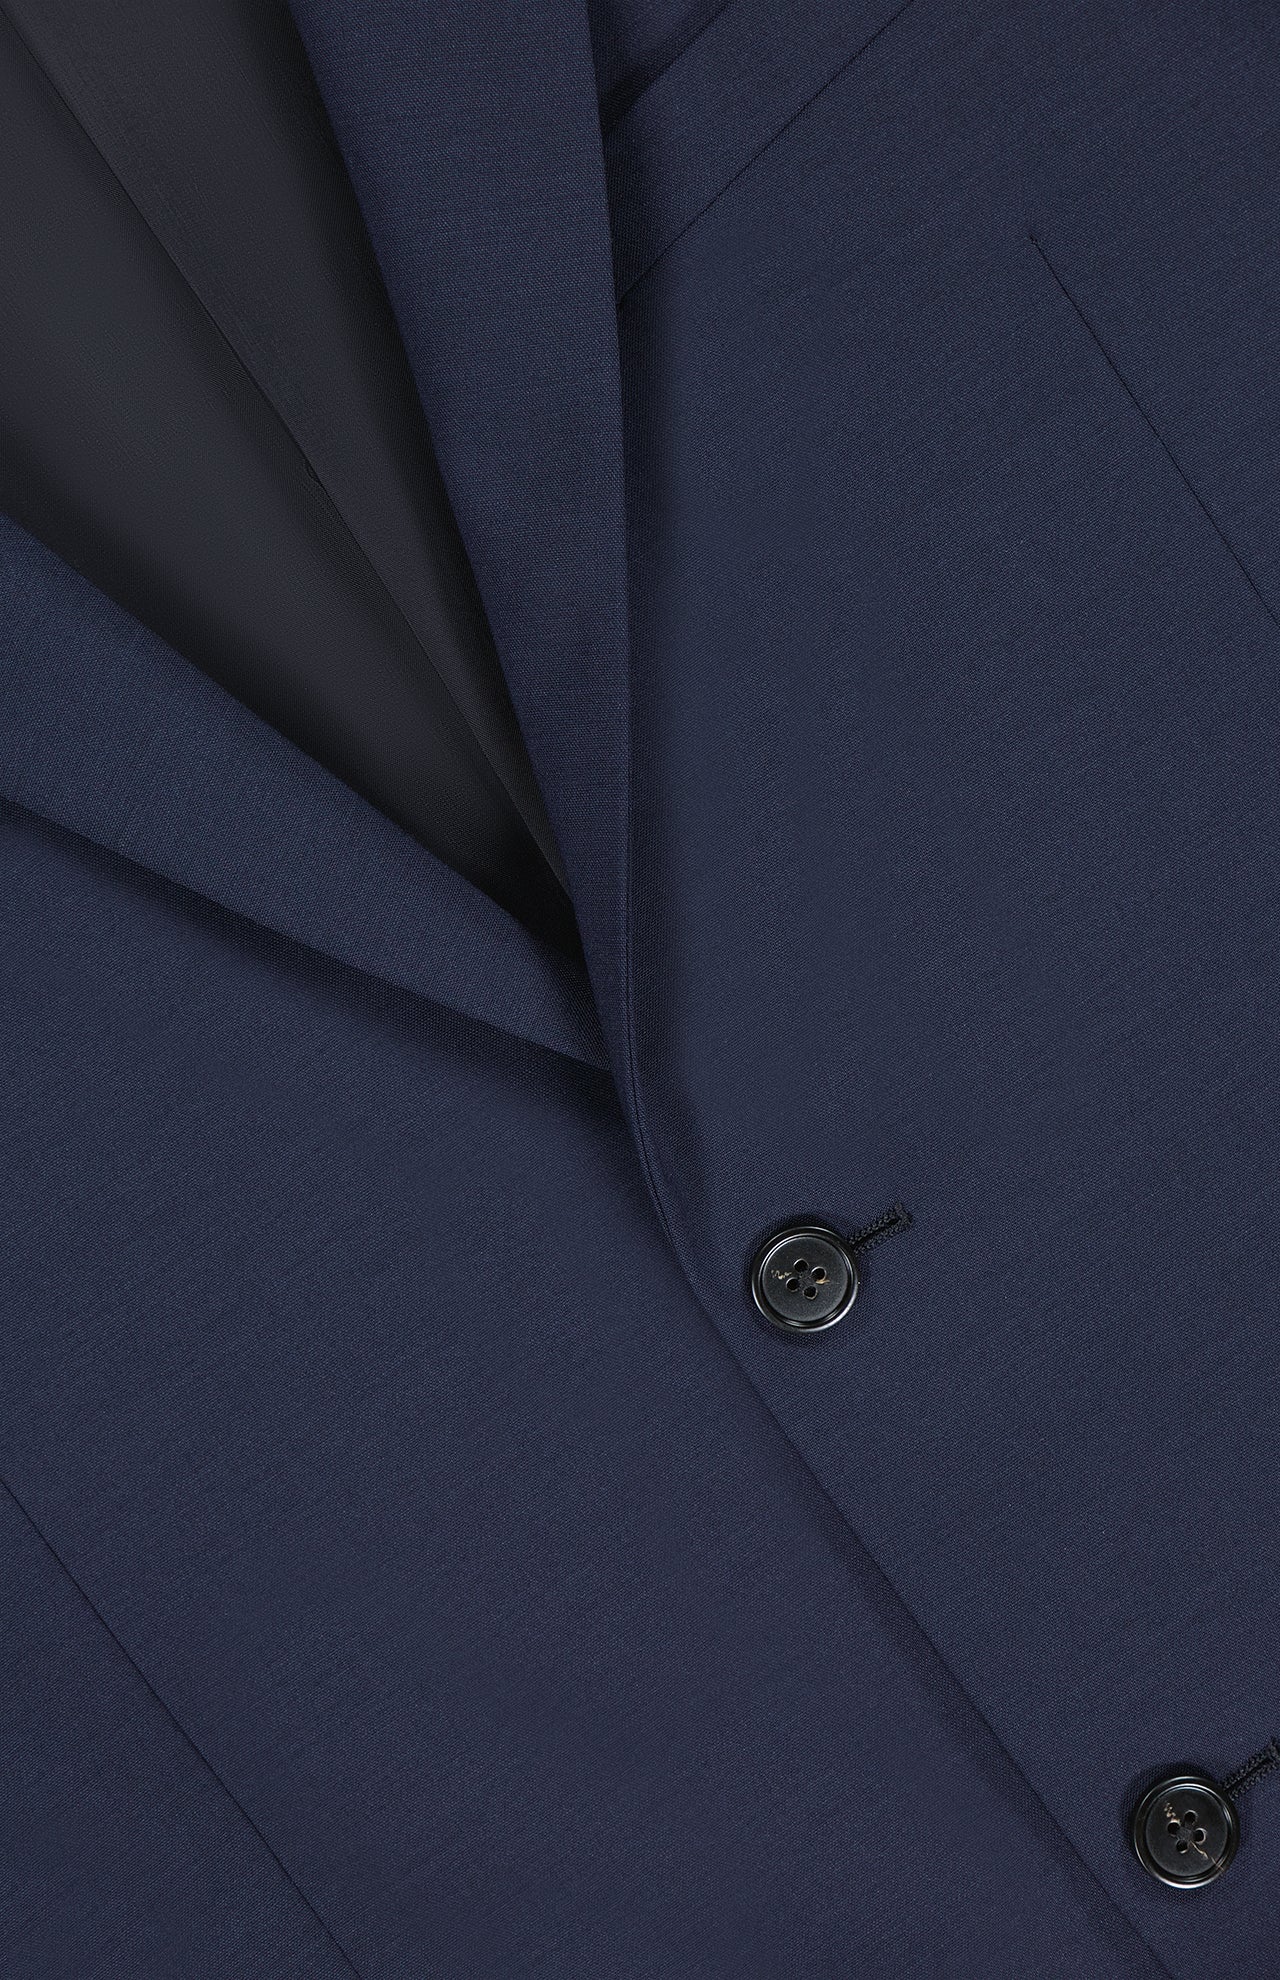 Chambers New Tailor 2 Suit Jacket (1737077162099)